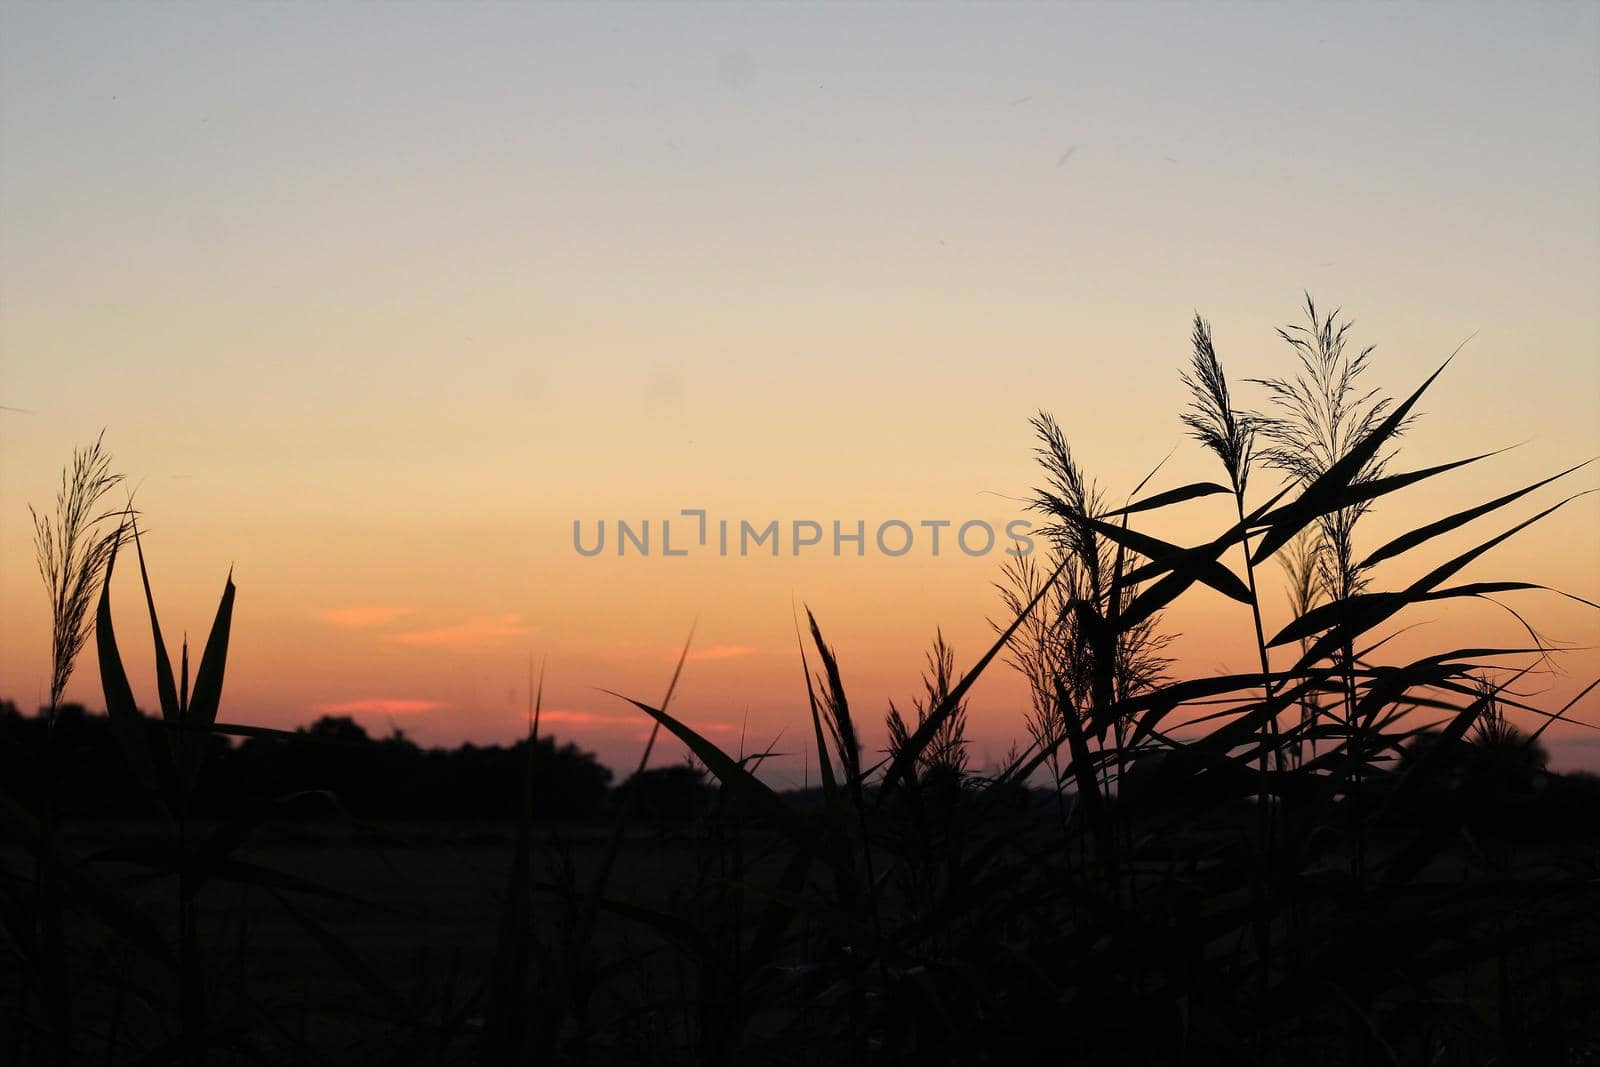 Beautyful sunset with reeds in the foreground